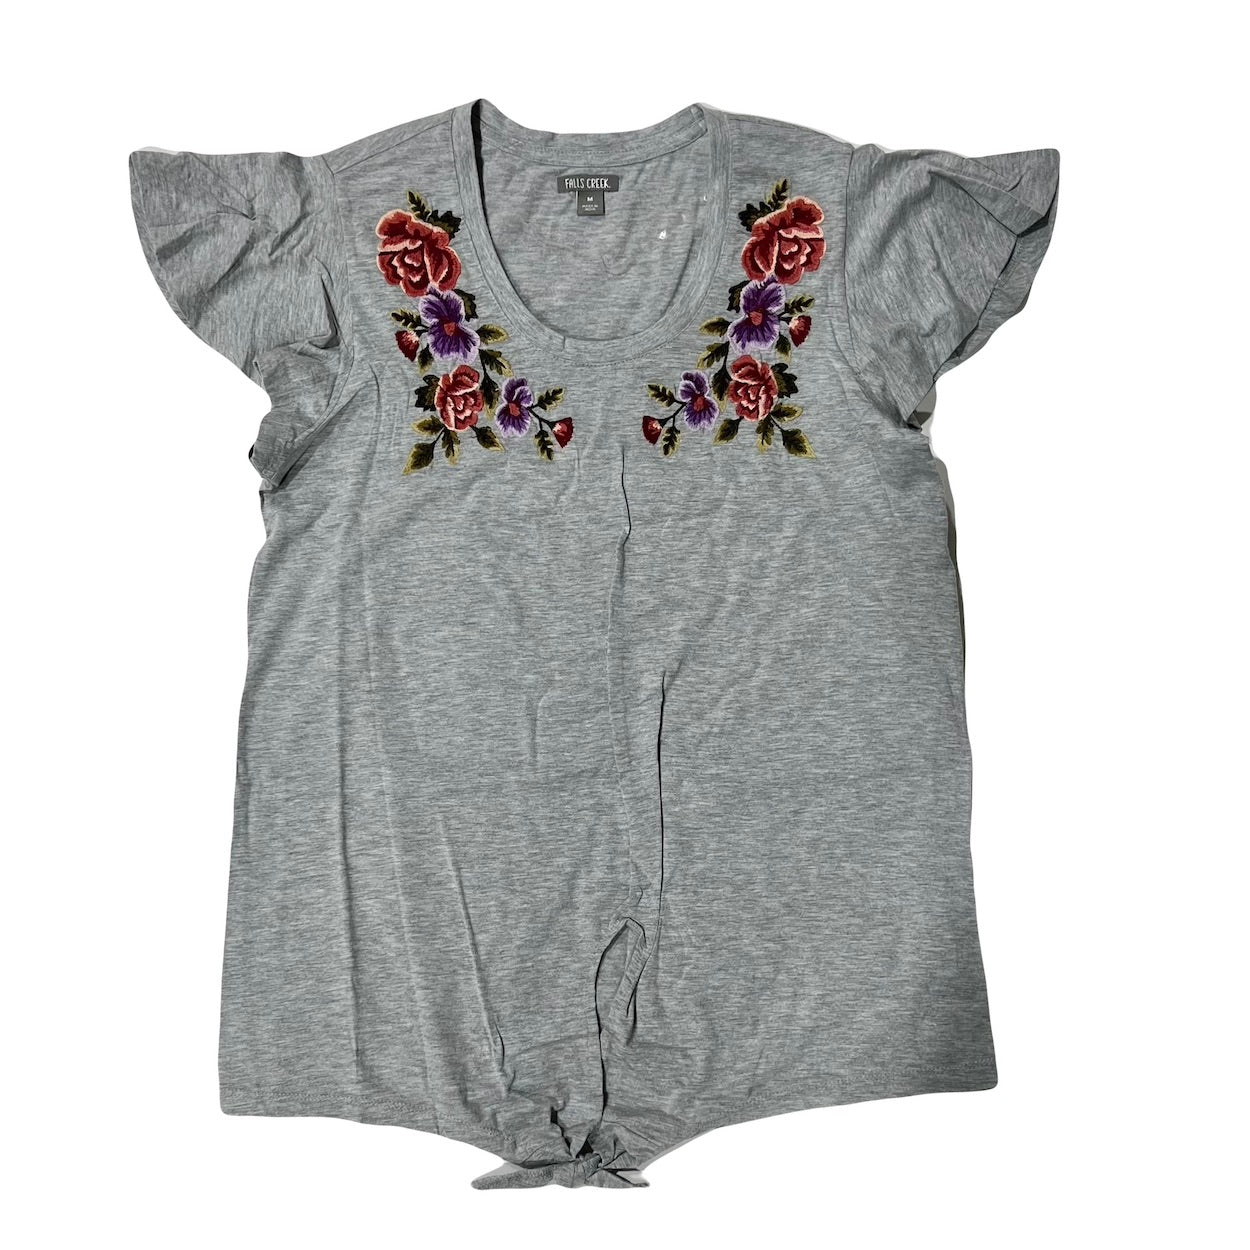 Women's Embroidered Top Size Med